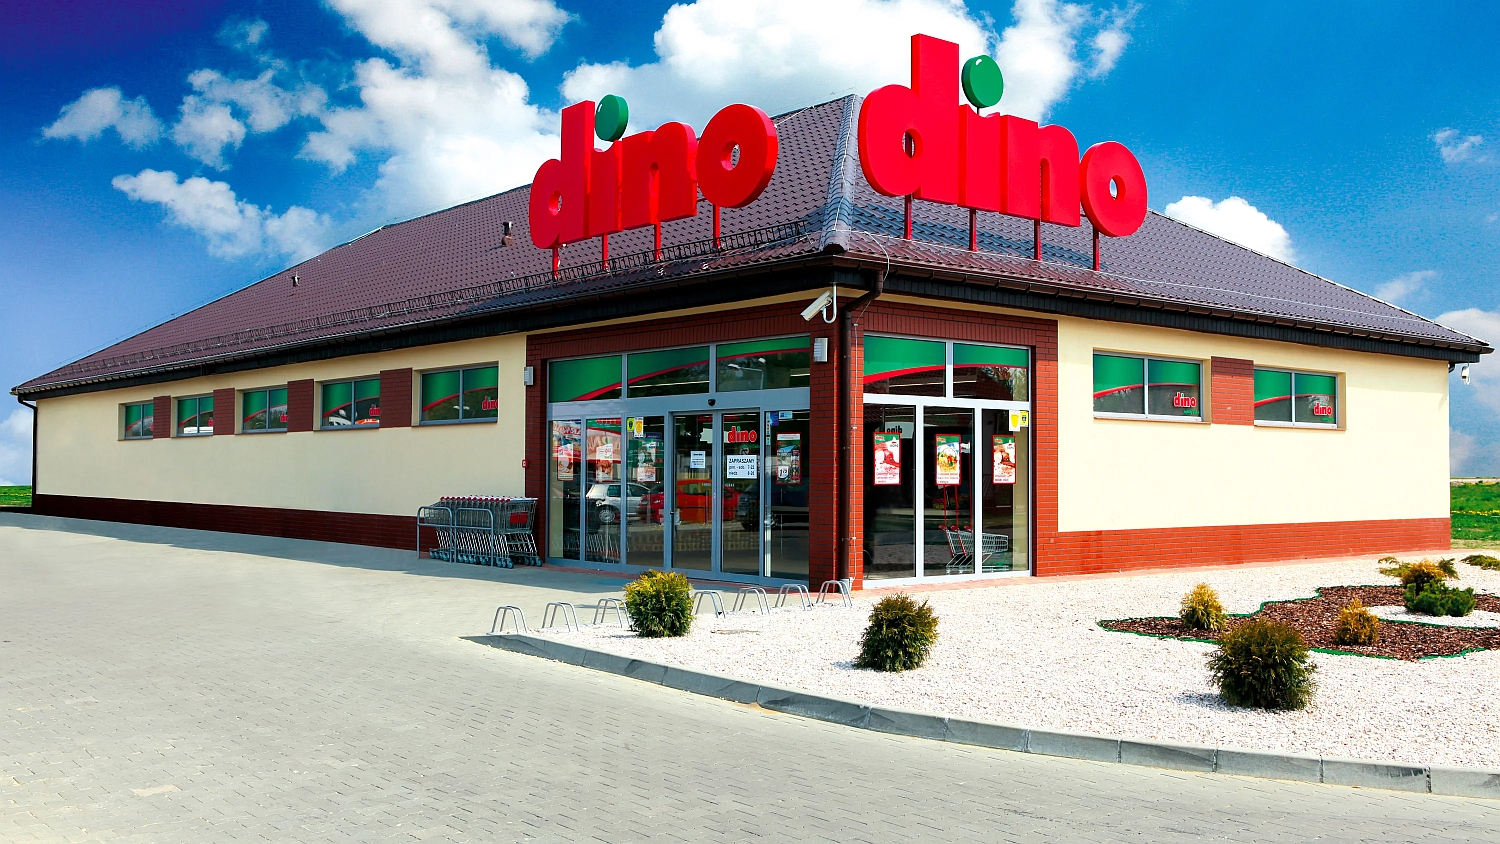 Dino Polska was opening one store a day in H1 2021